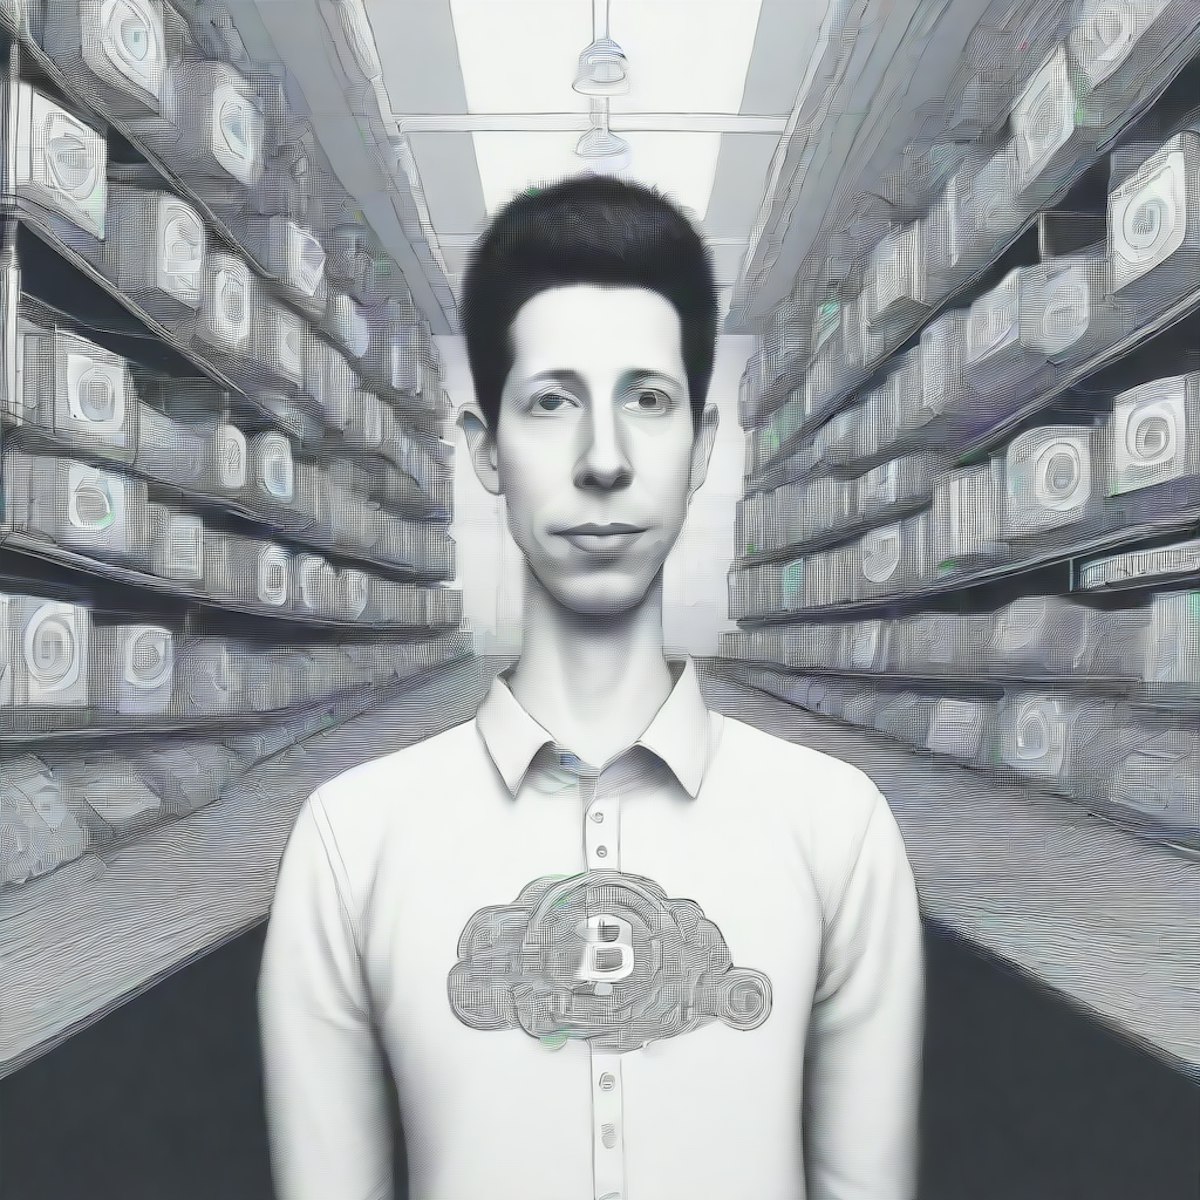 featured image - "Compute is Going to the Currency of the Future," says Sam Altman on the Lex Fridman Podcast 